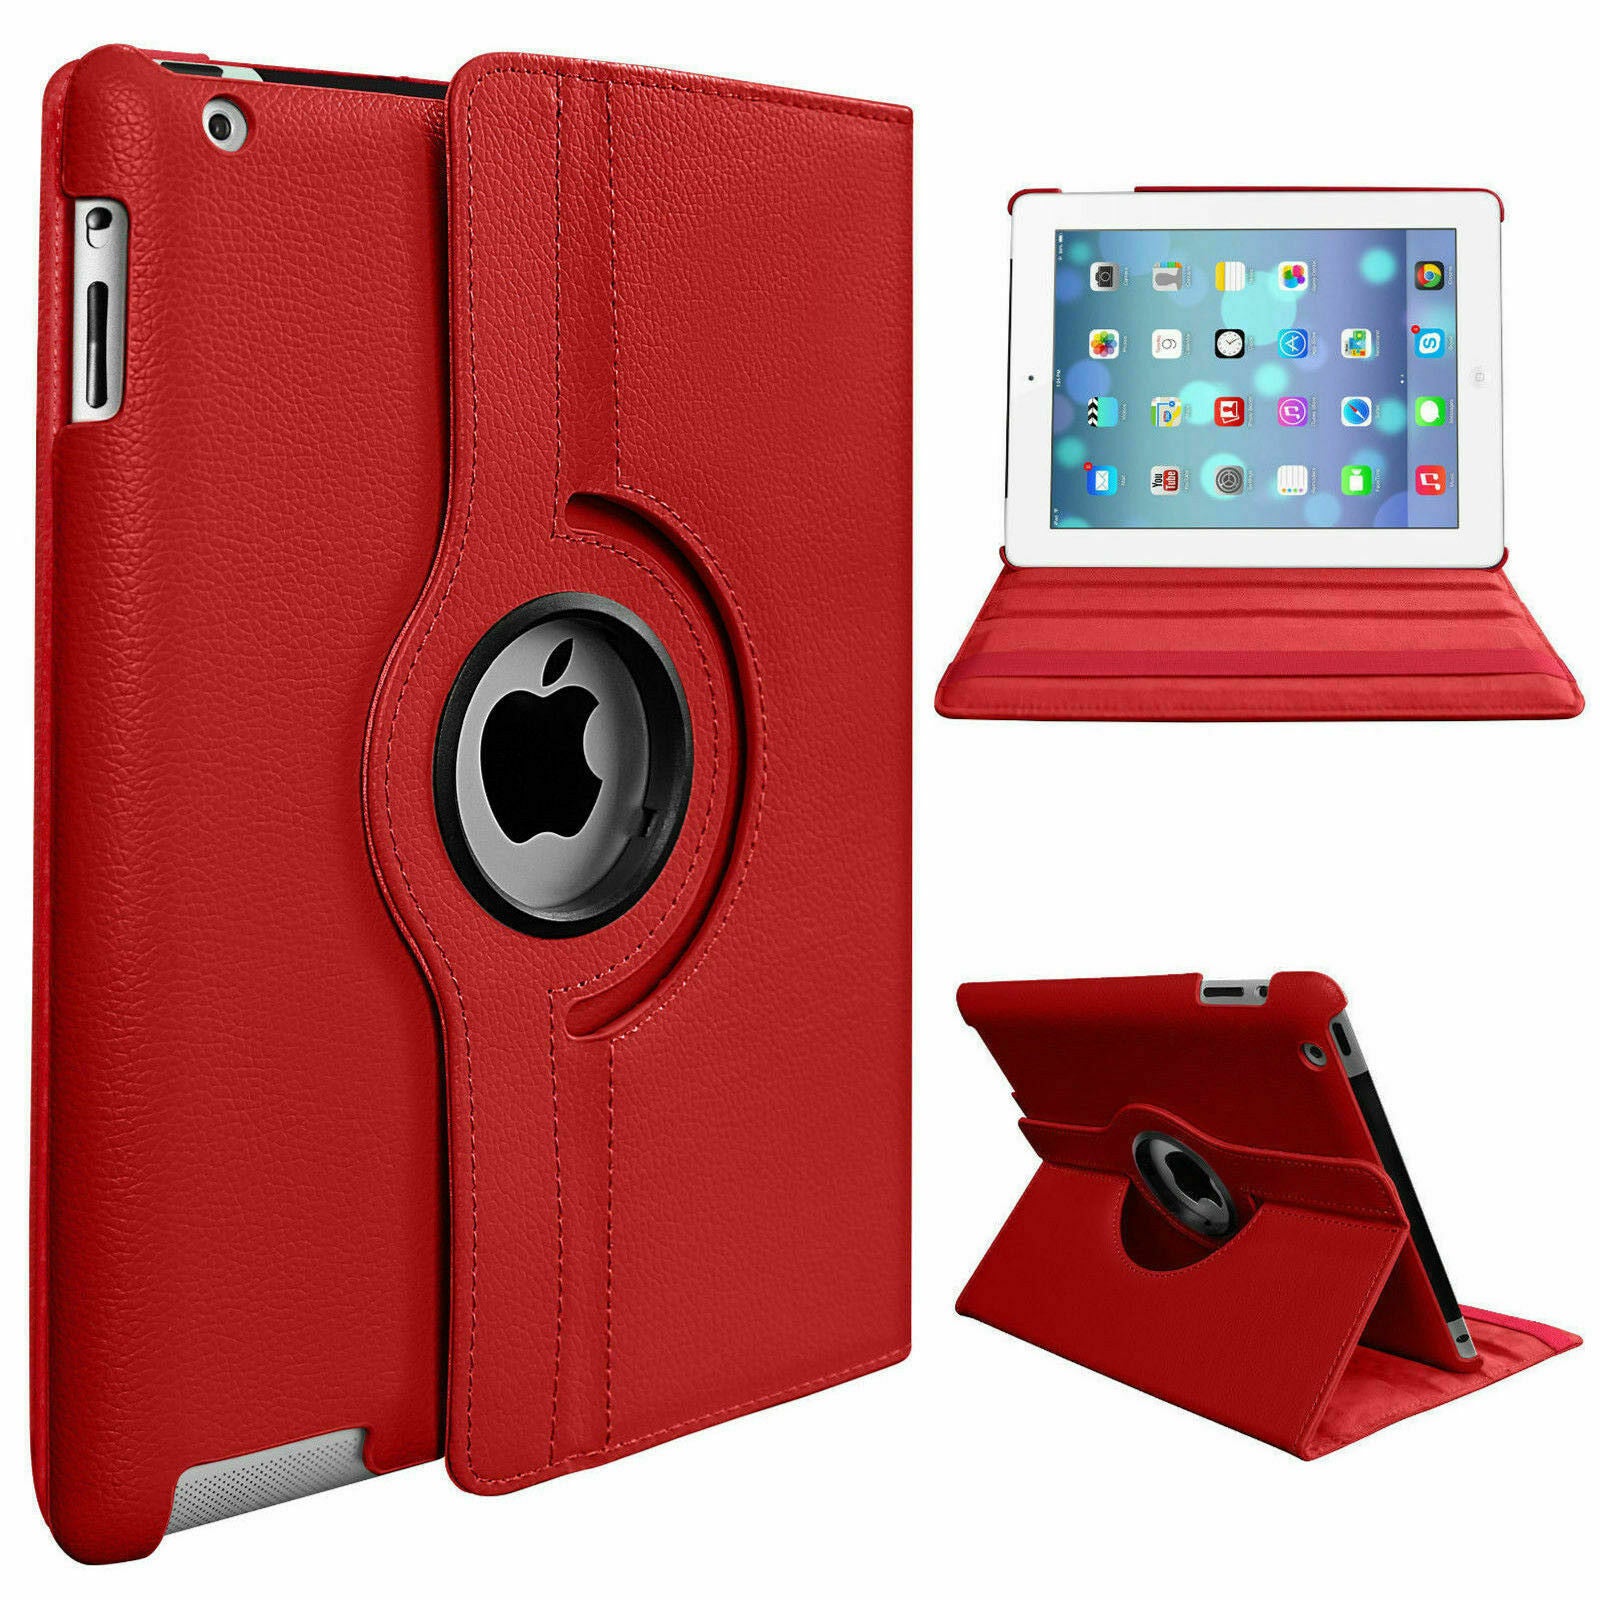 Leather 360 Rotating Smart Case Cover Apple iPad 10.5" Air 4